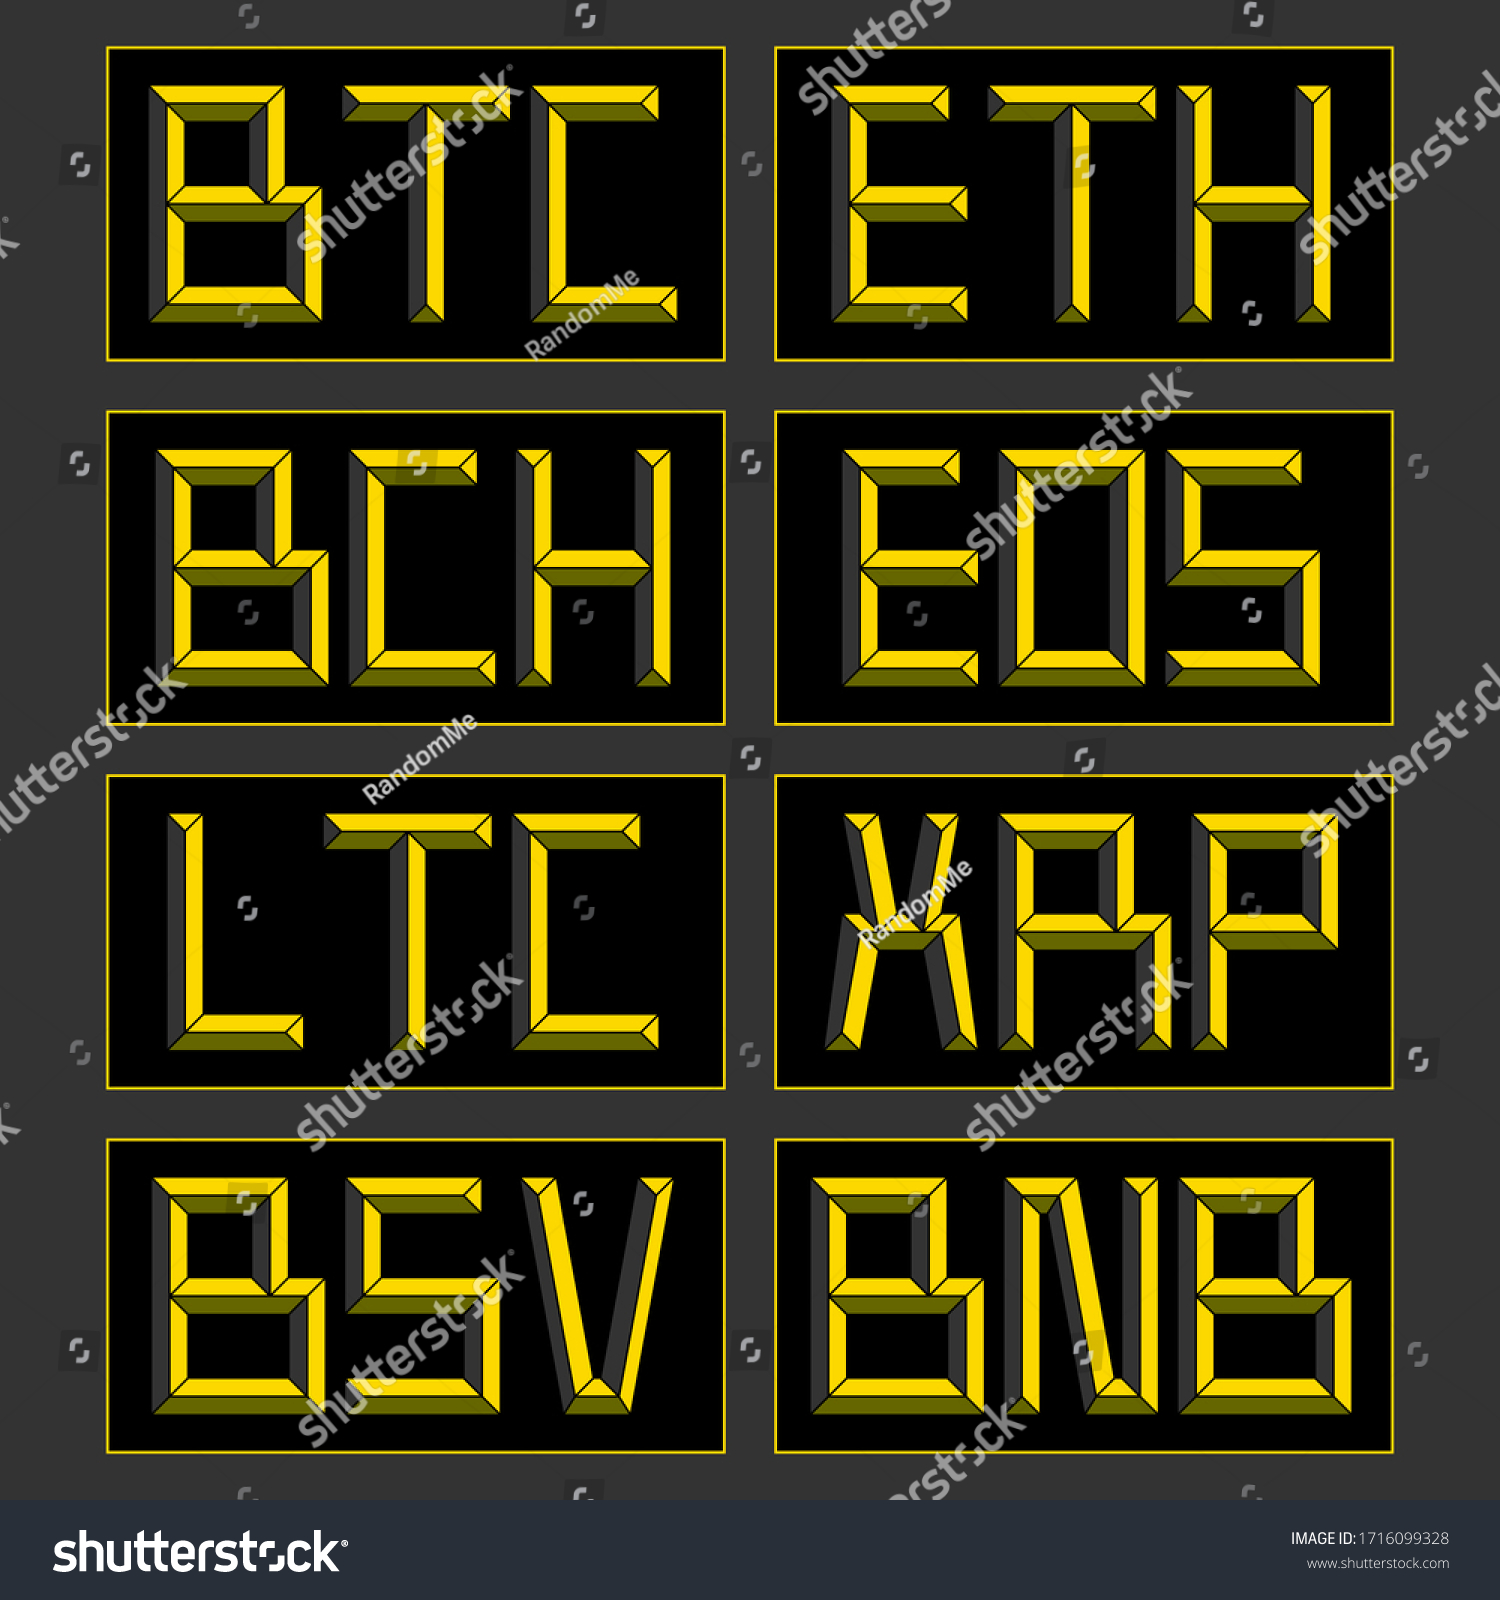 SVG of Vector set illustration of Cryptocurrency Ticker Symbols lettering in bevel style - perfect for bitcoin and cryptocurrency-related content, movement, product, service, exchange, etc. svg